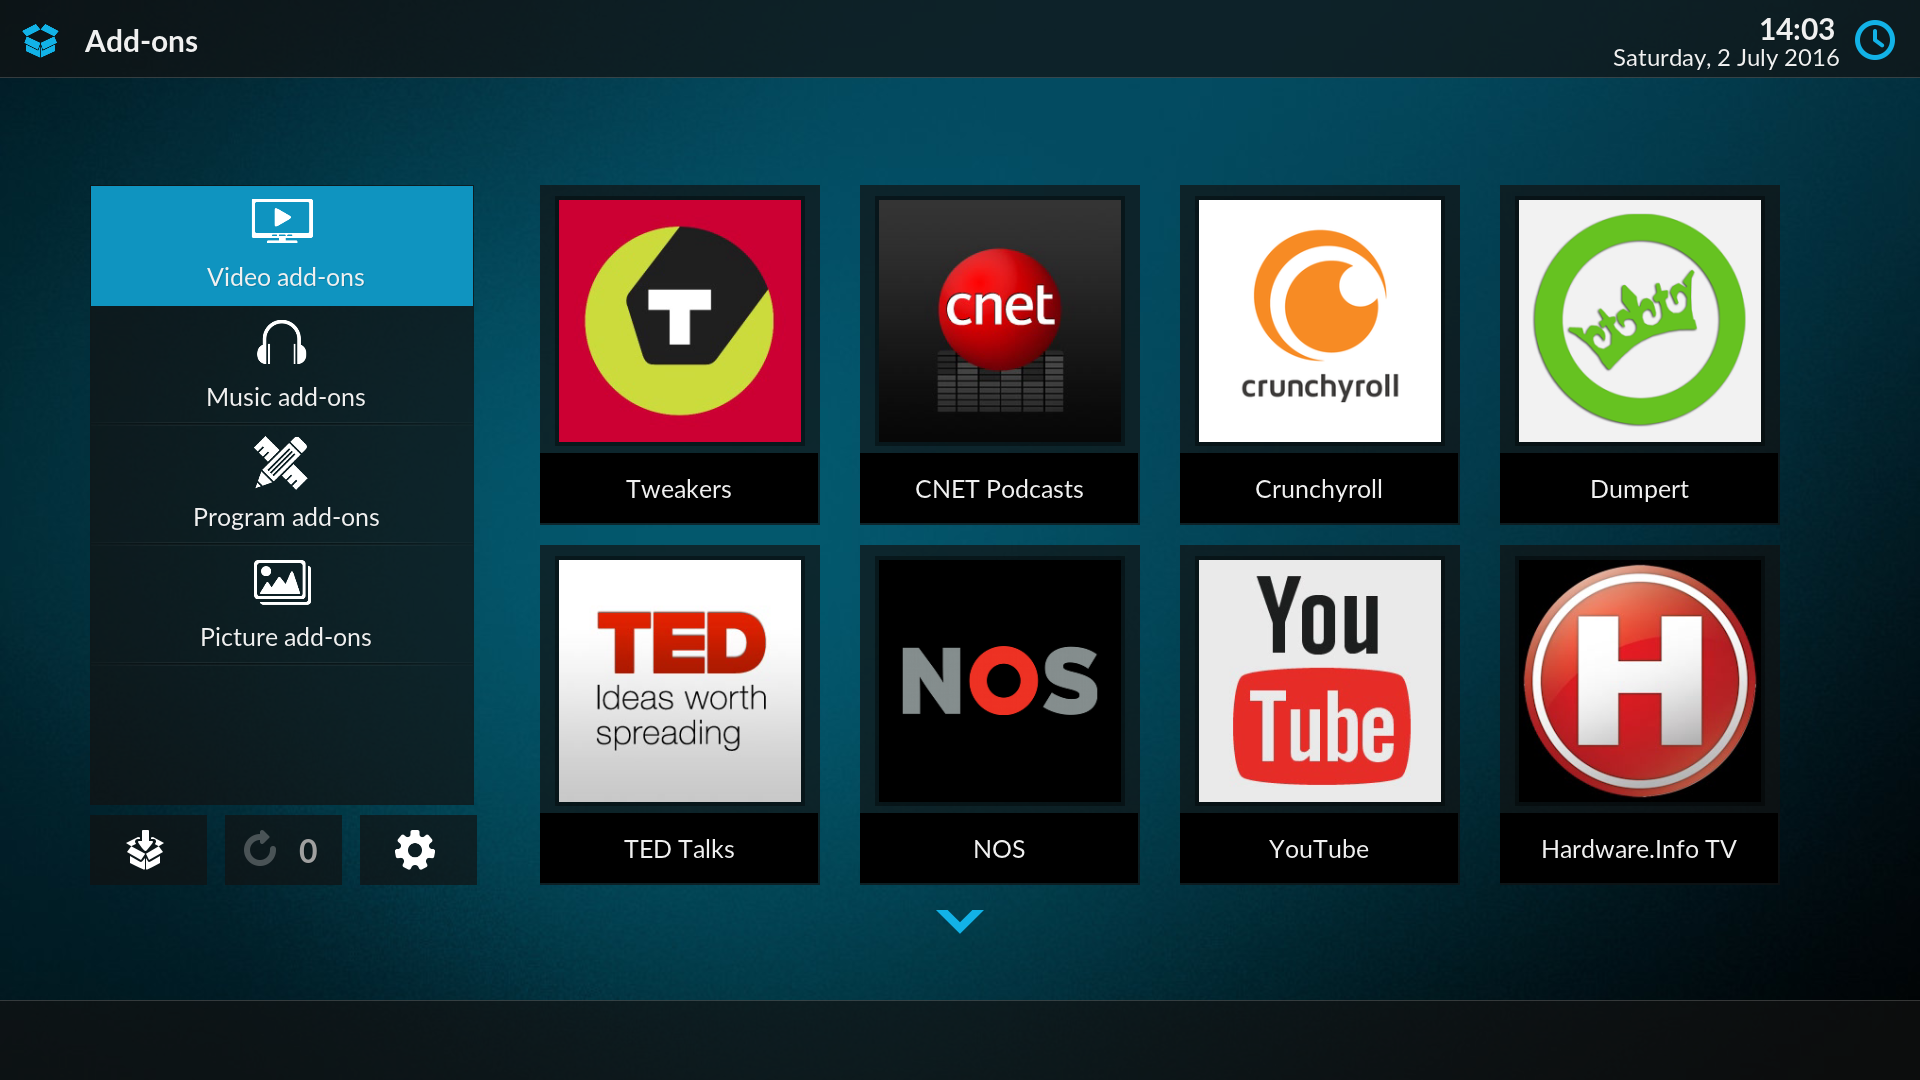 kodi 17.6 build for android tablet